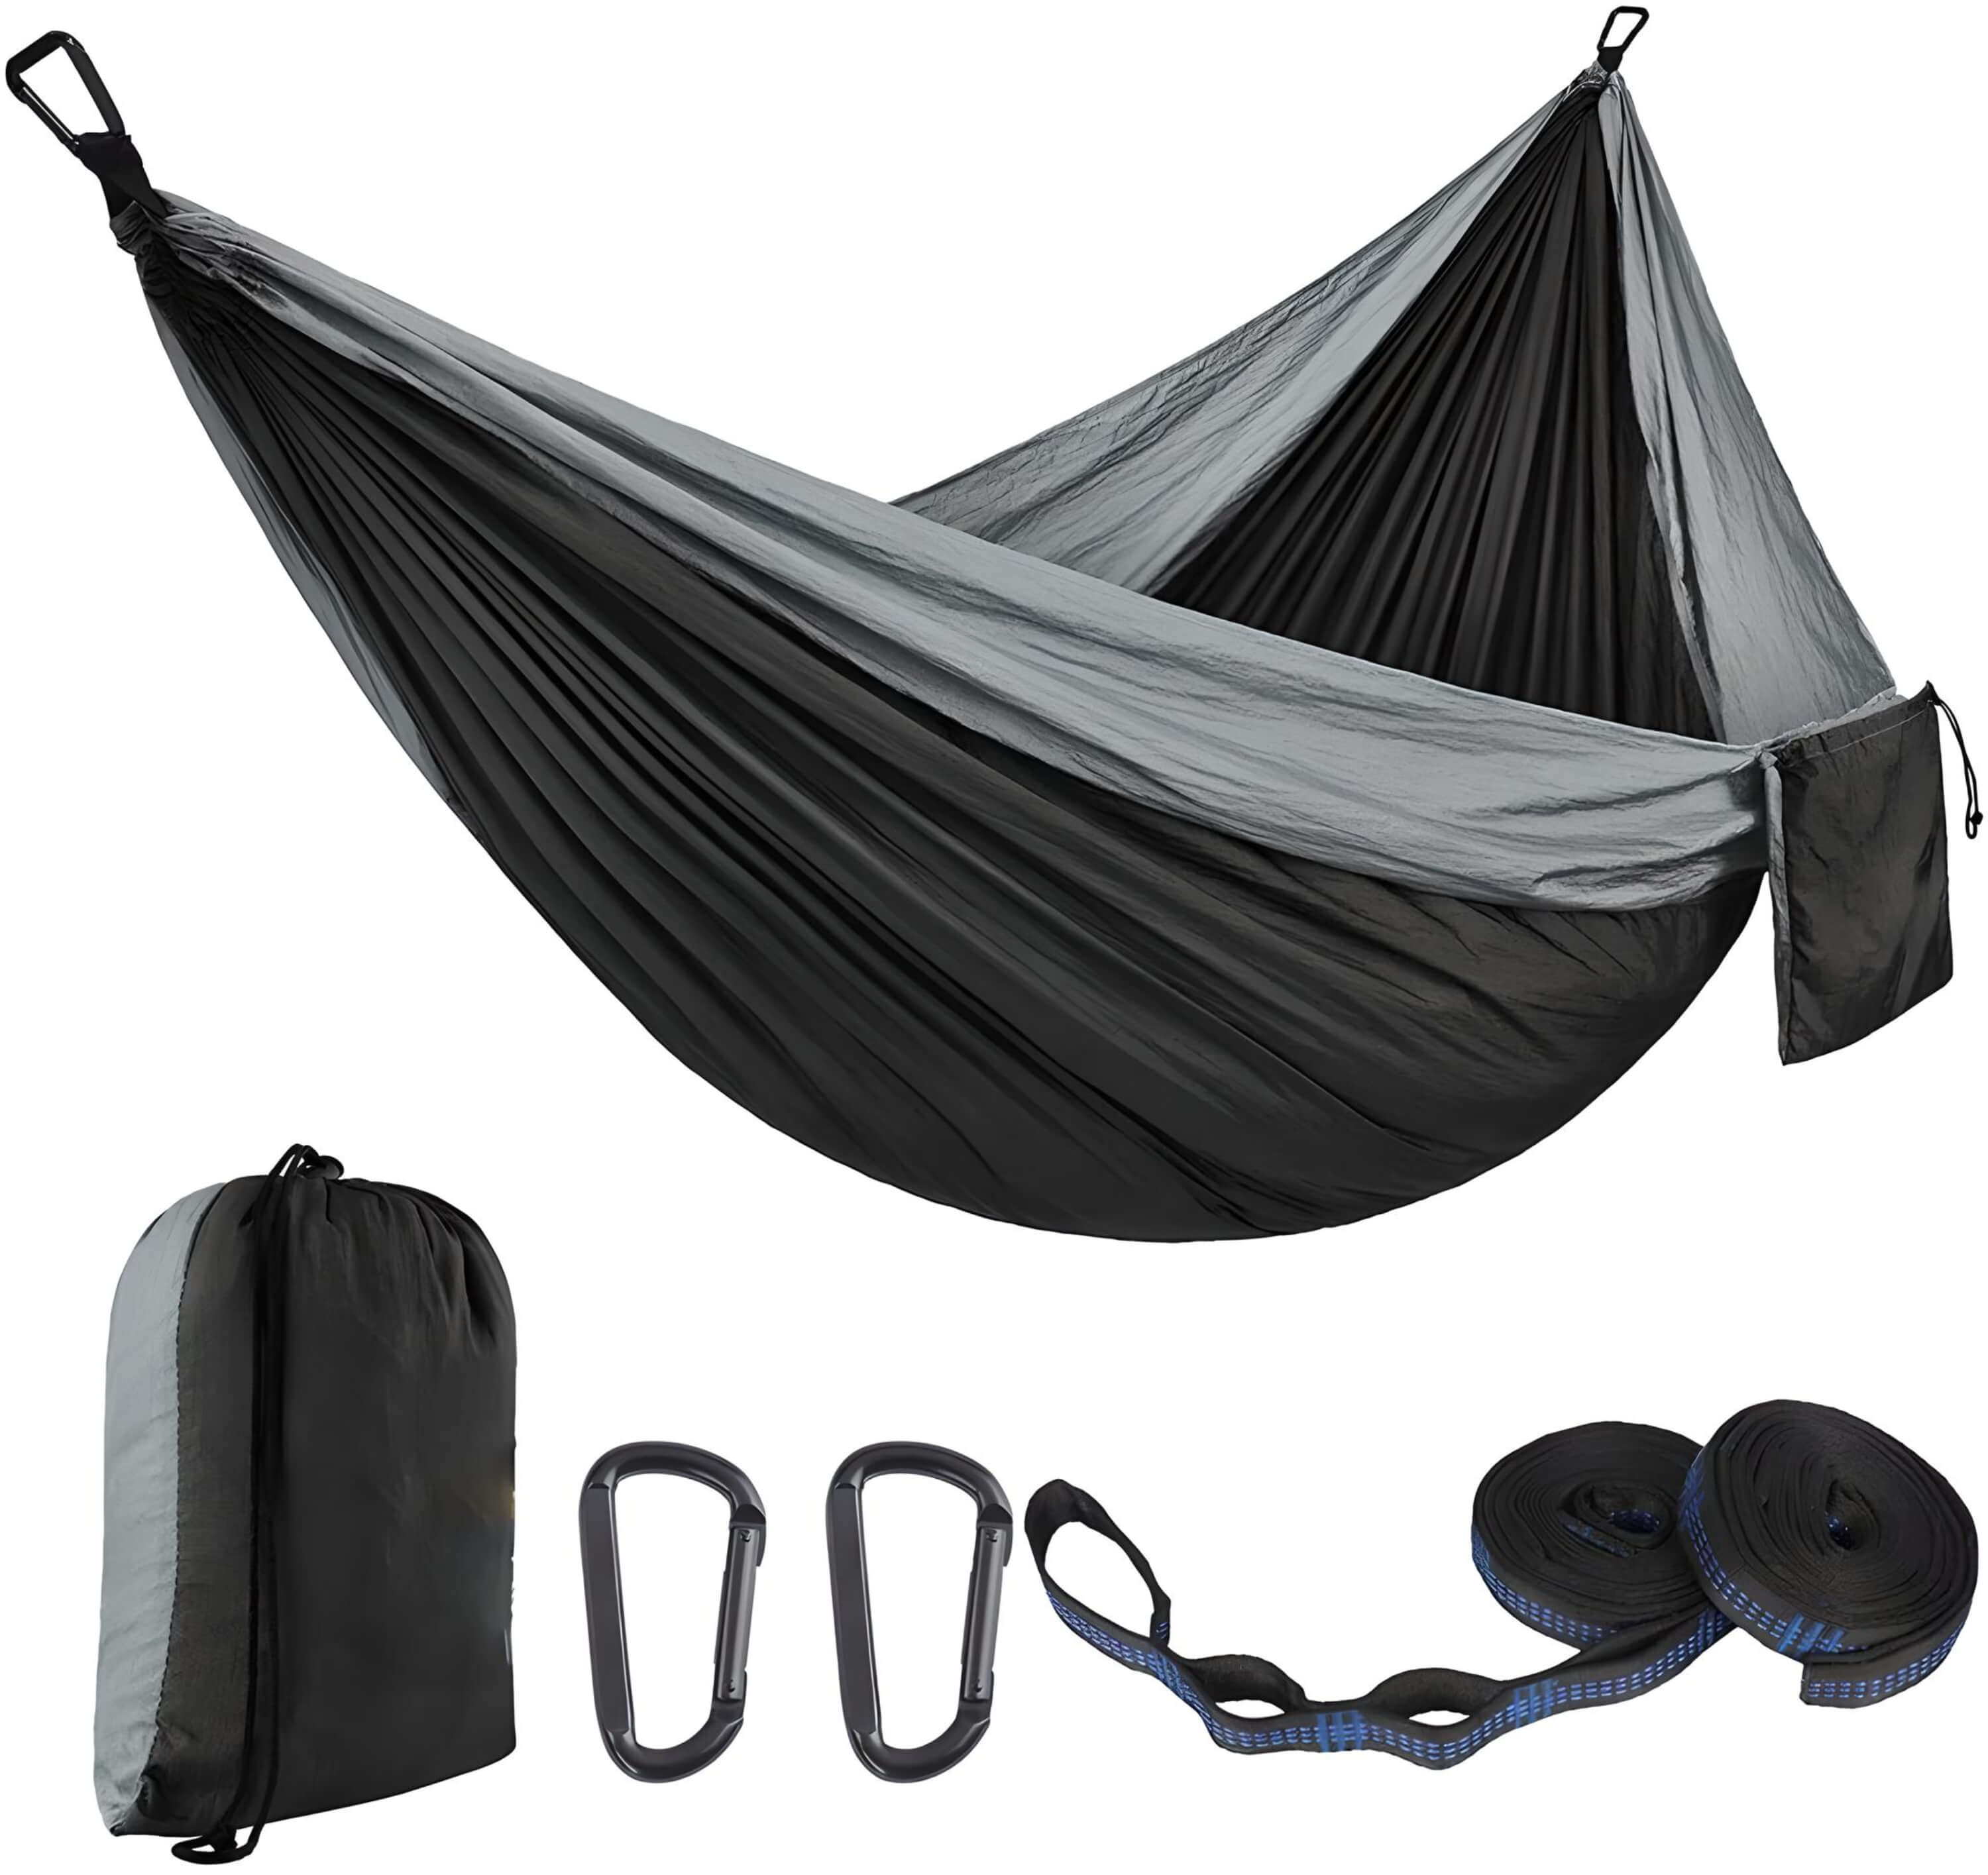 2person-hammock-with-mosquito-net-black-colour